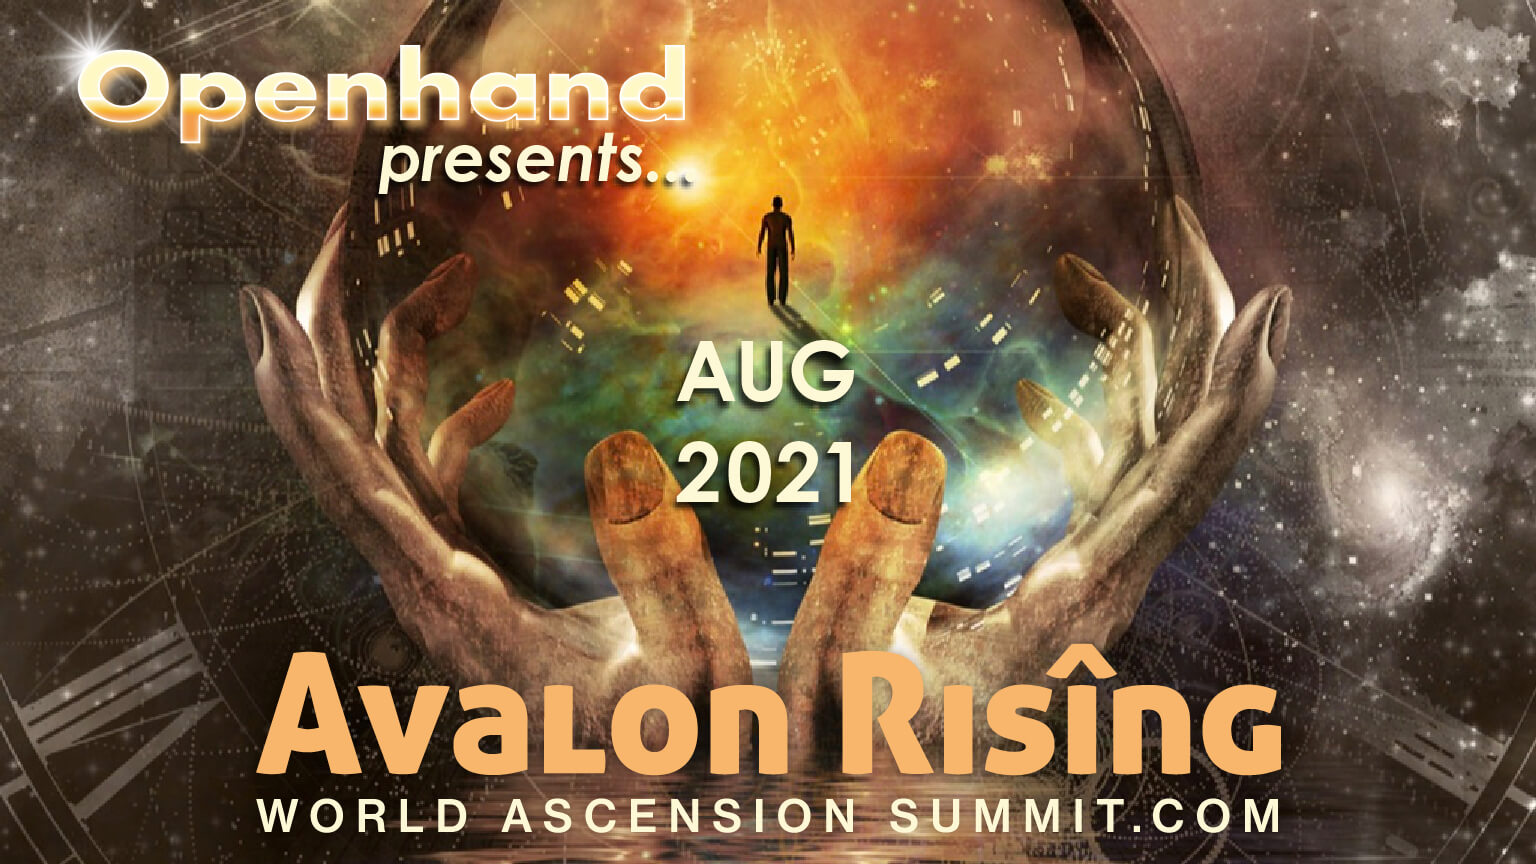 Avalon Rising World Ascension Summit with Openhand